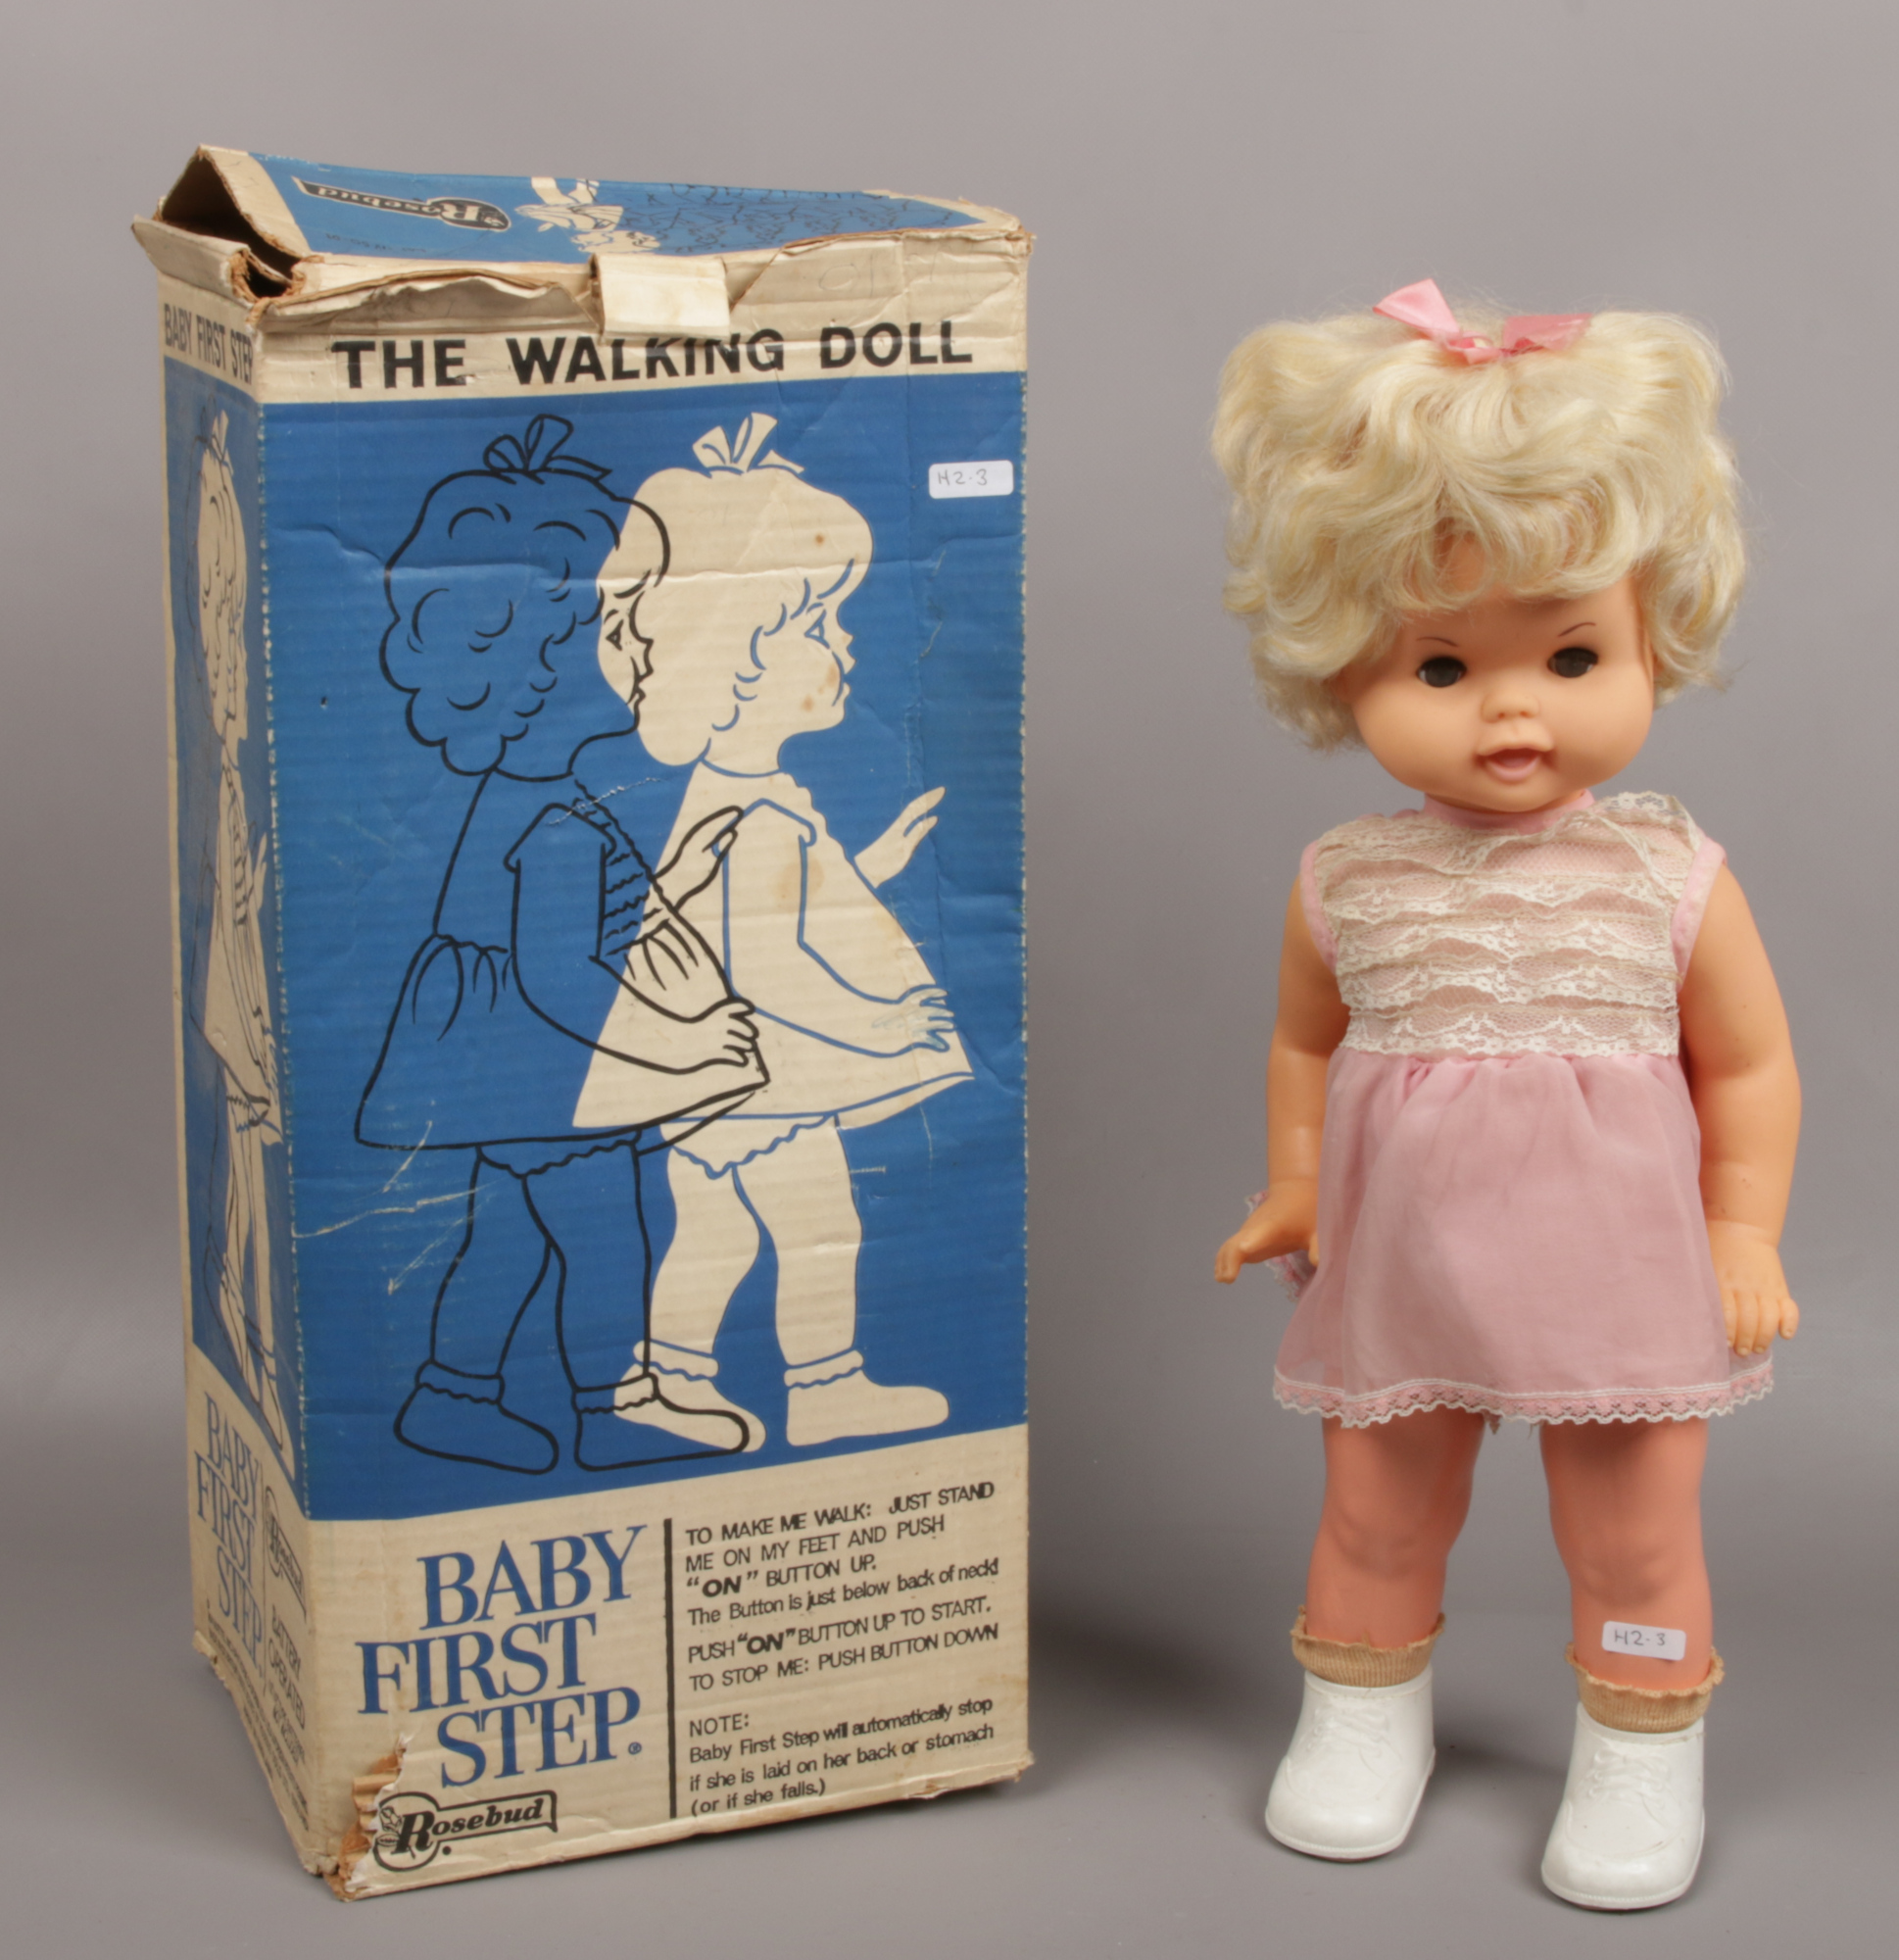 A 1960s battery powered baby first steps doll in original box by Rosebud Mattel.